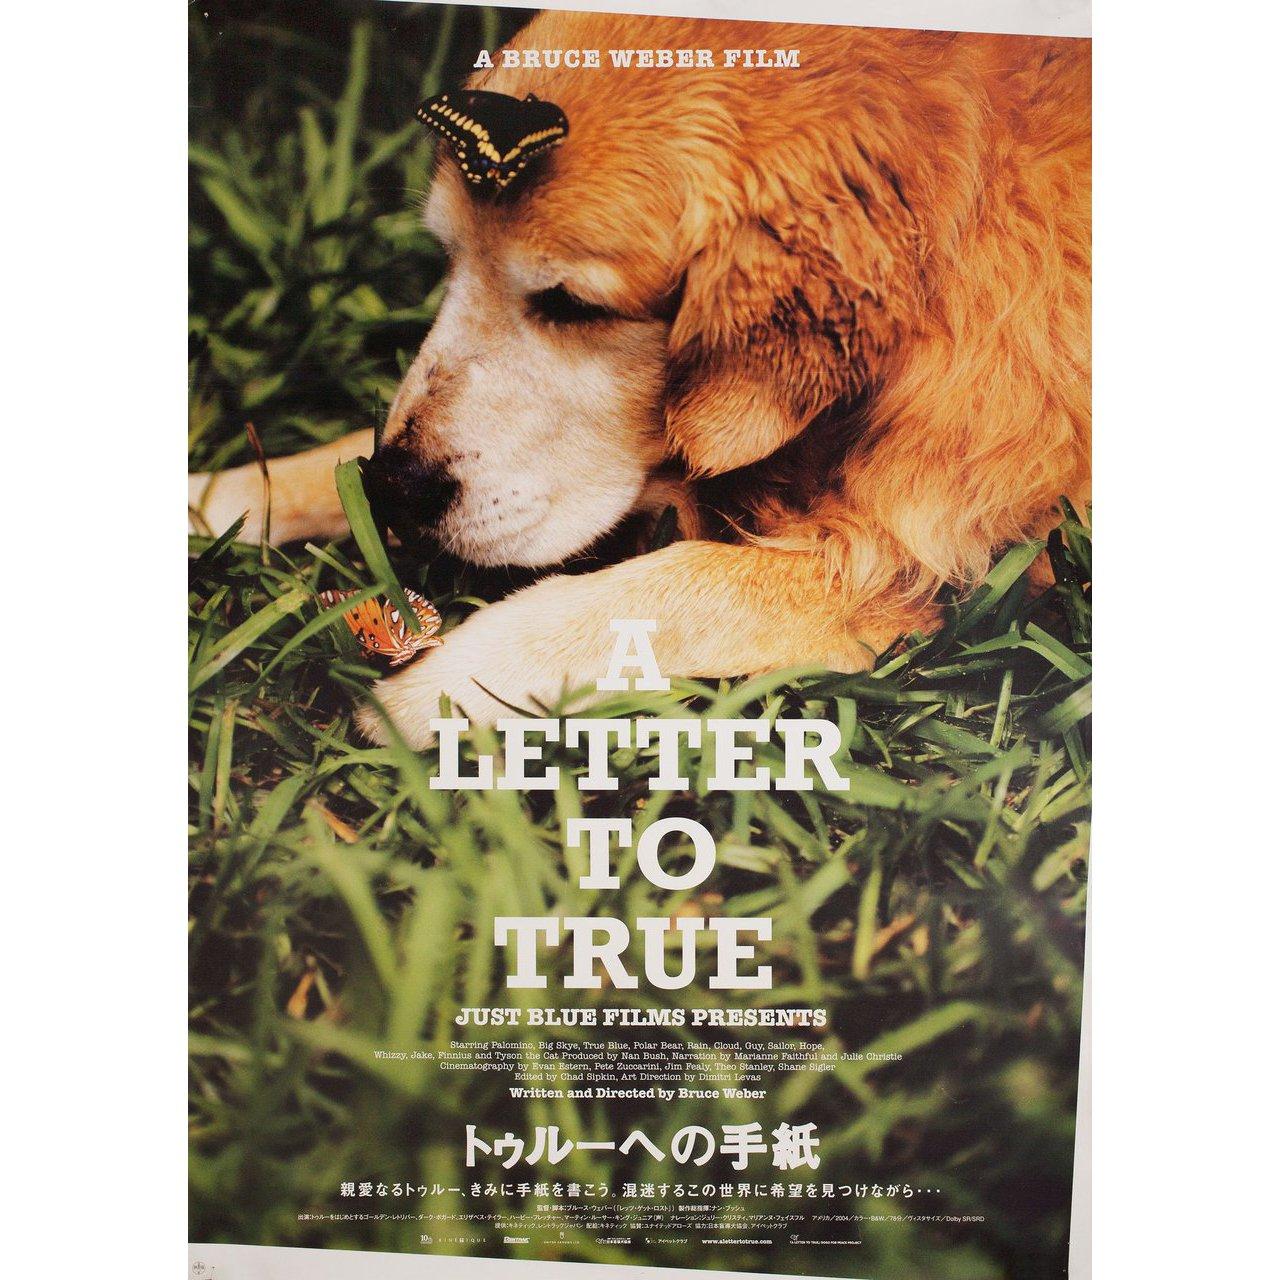 Original 2004 Japanese B2 poster for the documentary film A Letter to True directed by Bruce Weber with Julie Christie / Marianne Faithfull / Bruce Weber / Thomas Sessa. Very Good-Fine condition, rolled with pinholes. Please note: the size is stated